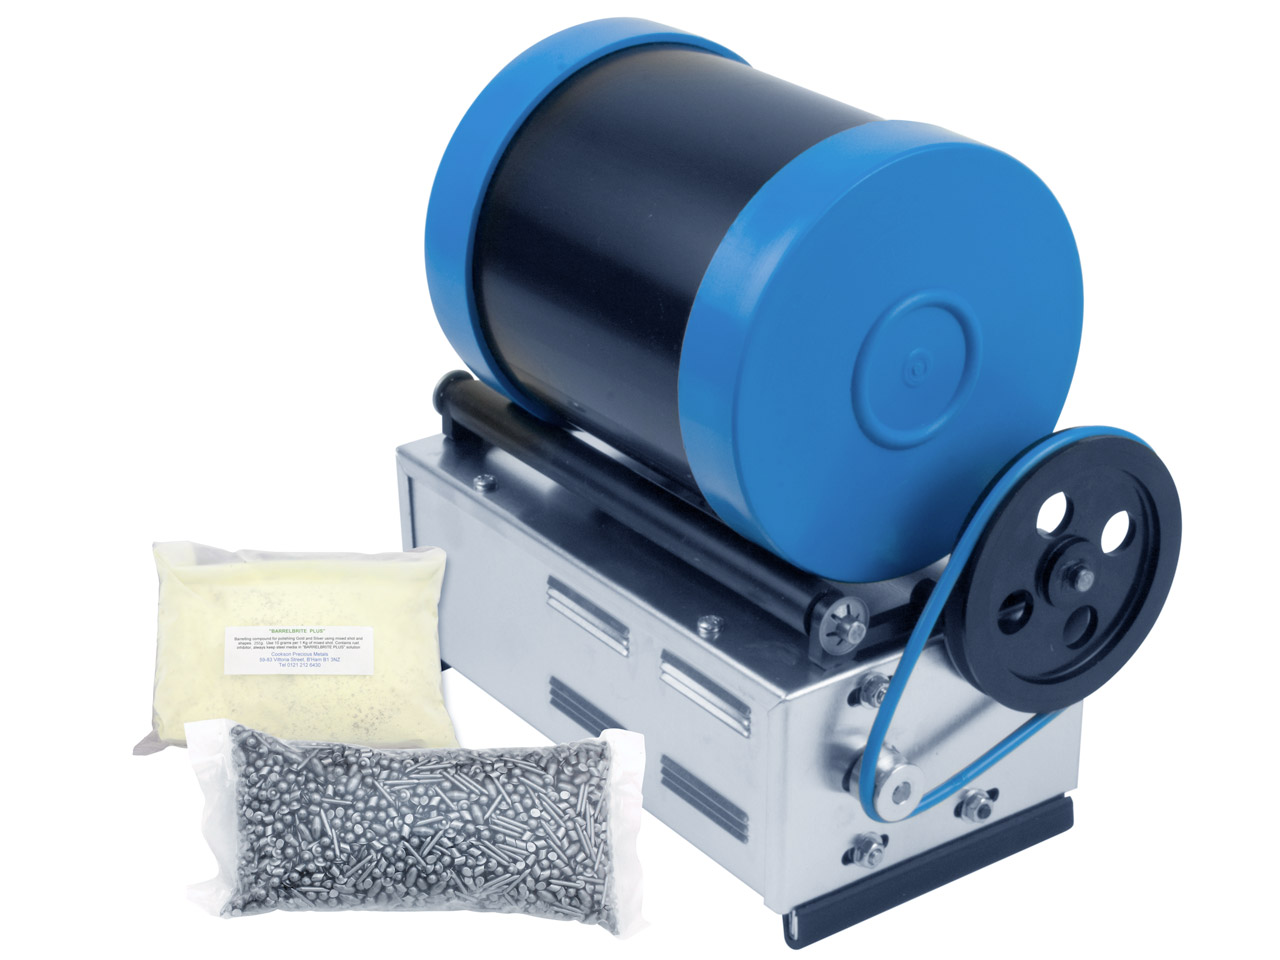 Do you have instructions for Barrel Tumbling Machine 3lb With Metal Polishing Kit?